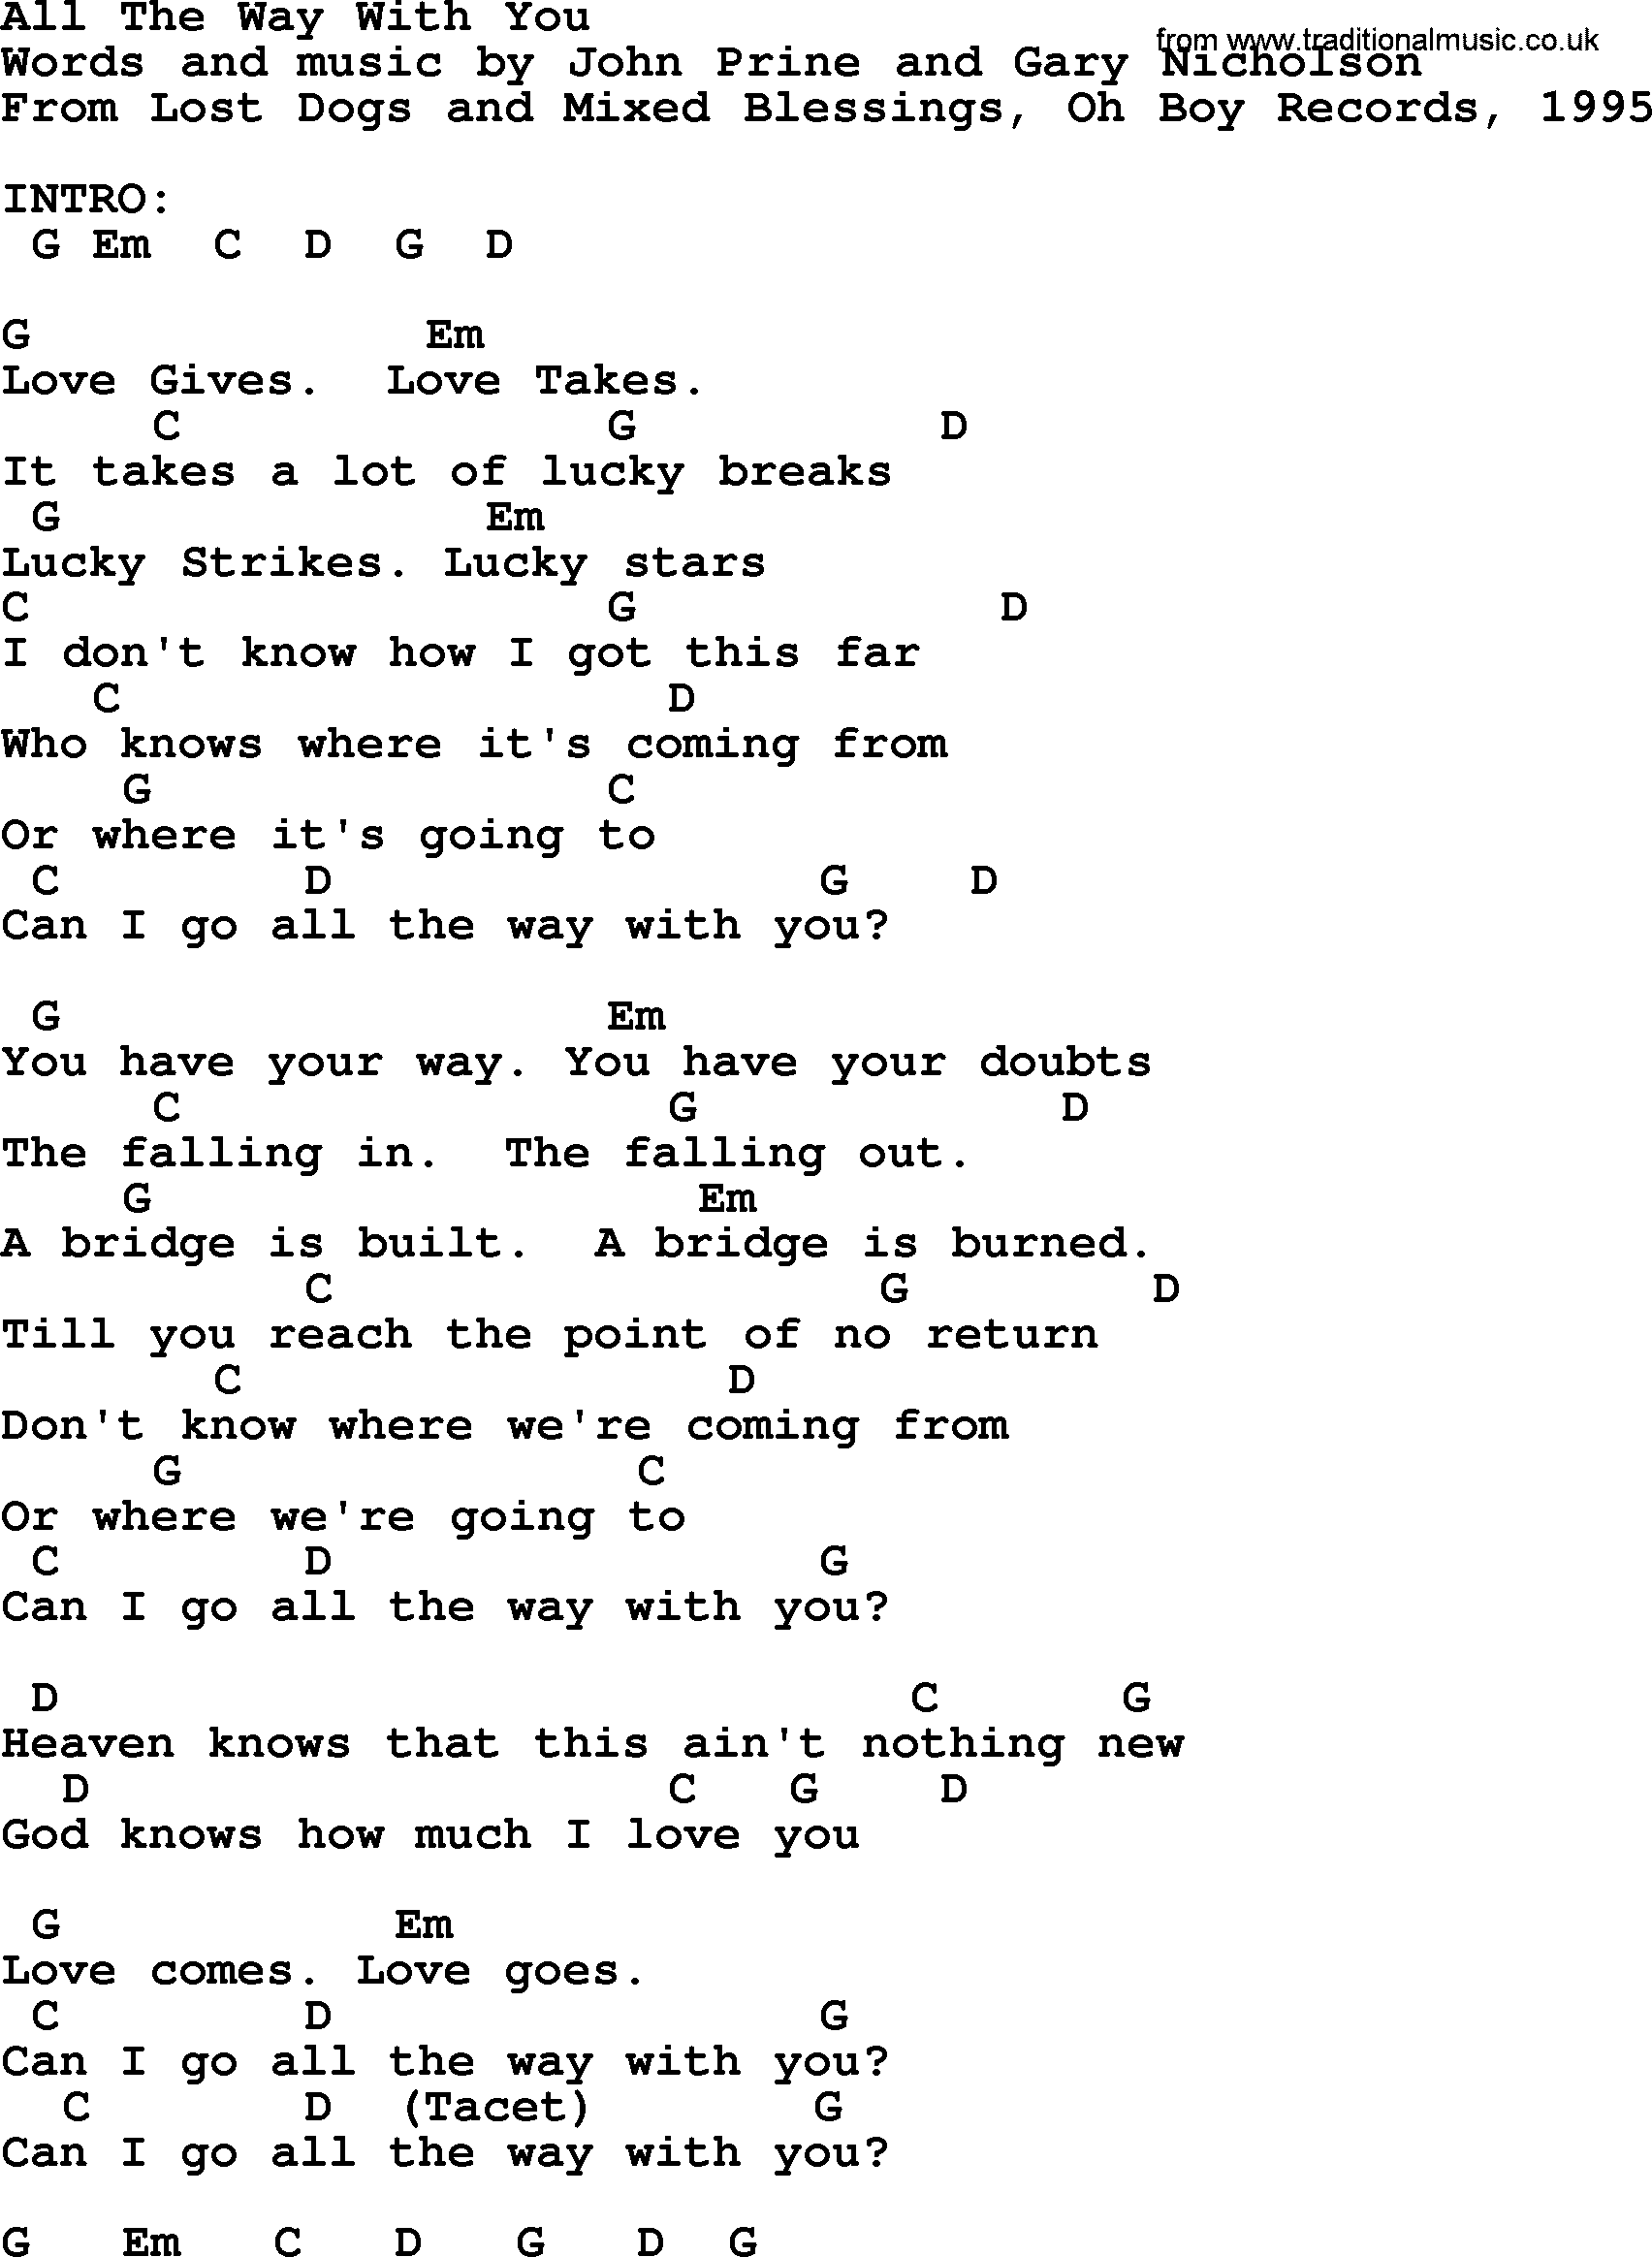 Bluegrass song: All The Way With You, lyrics and chords